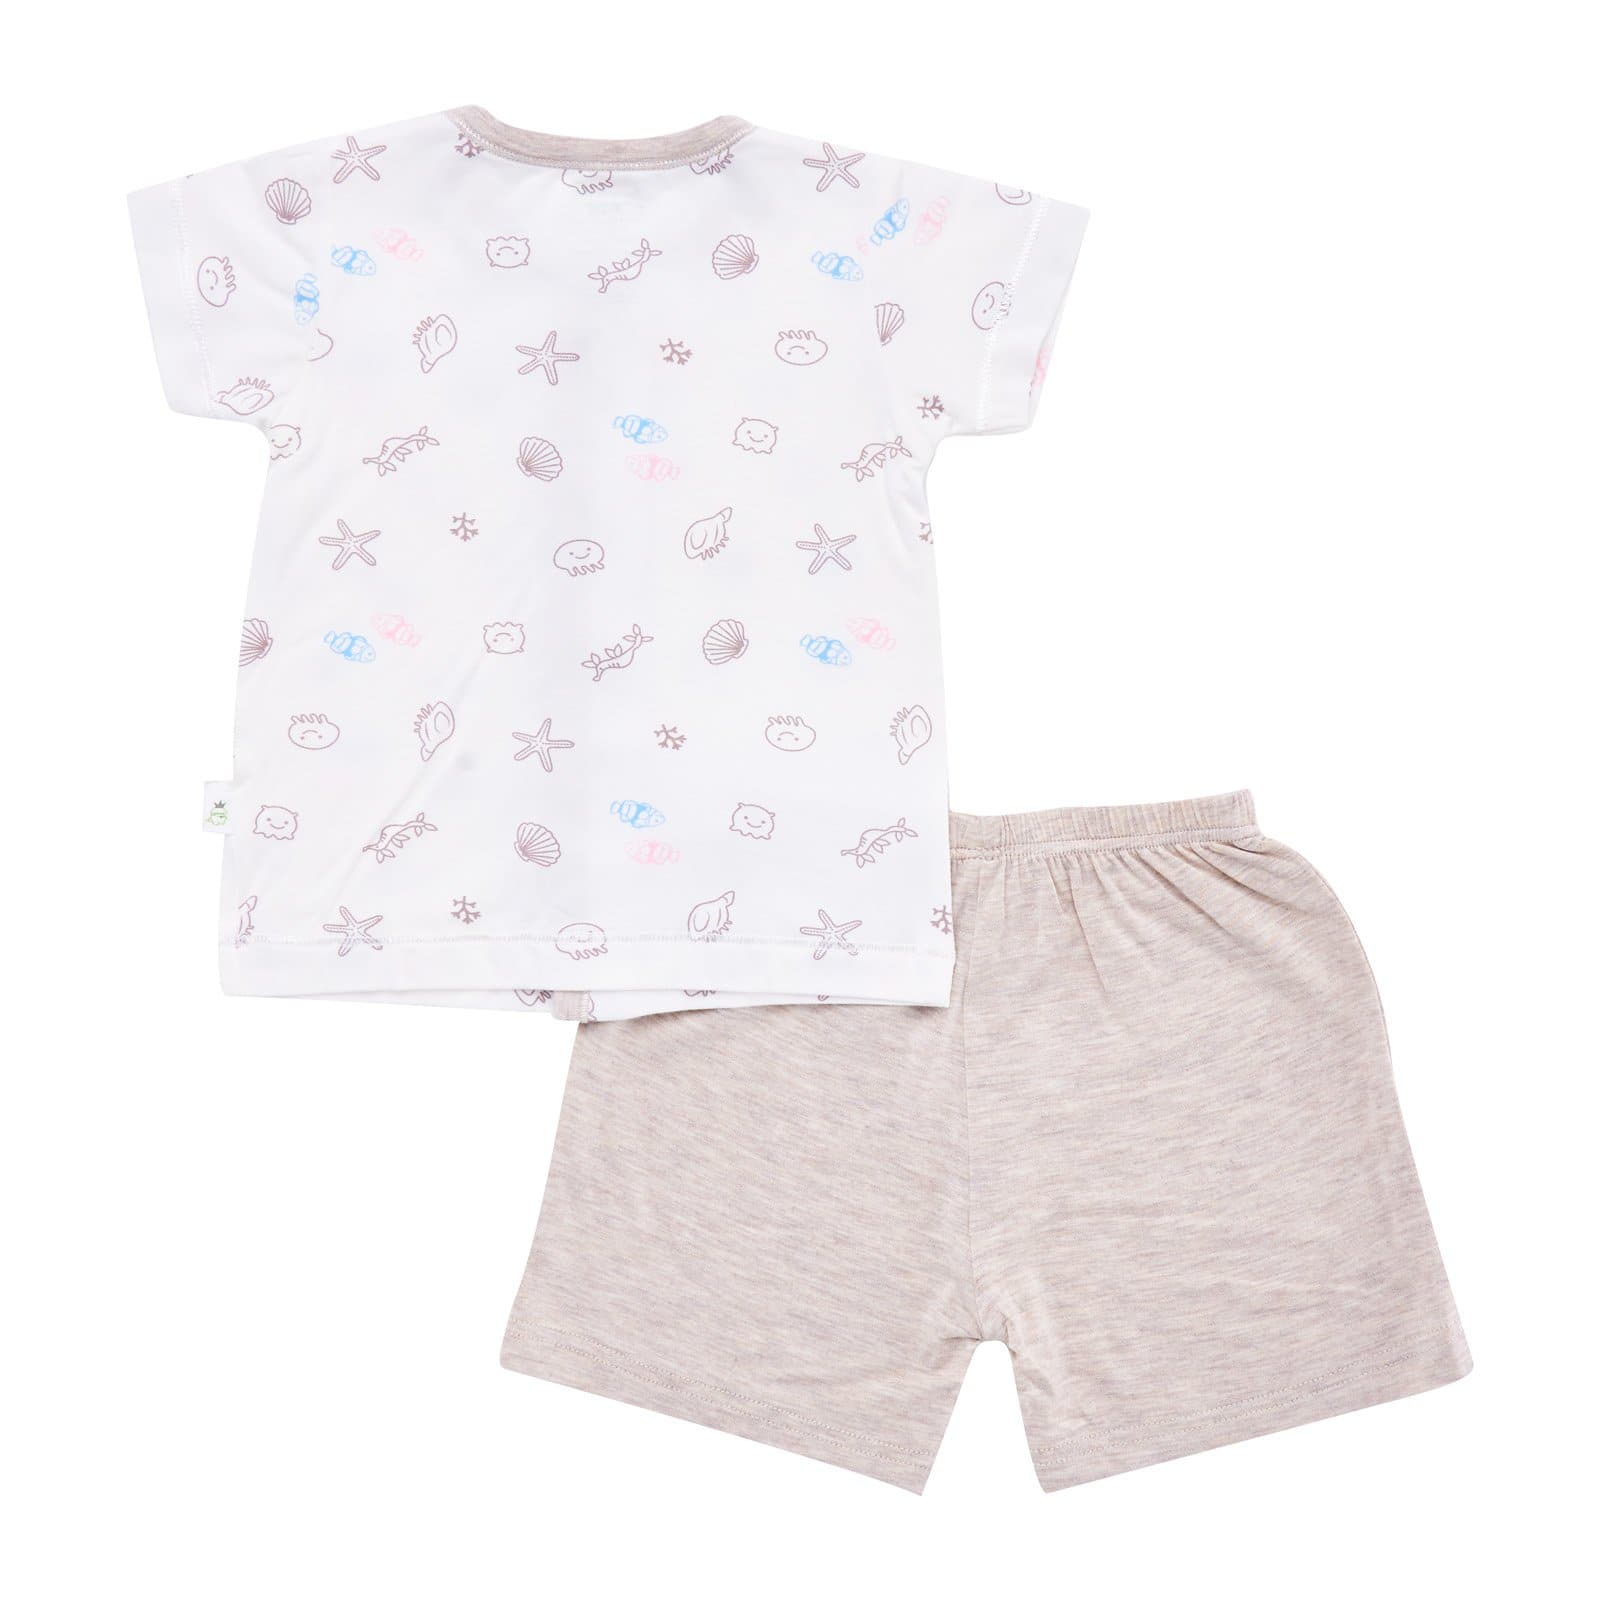 Seashells - Short sleeved button vest with shorts - Simply Life